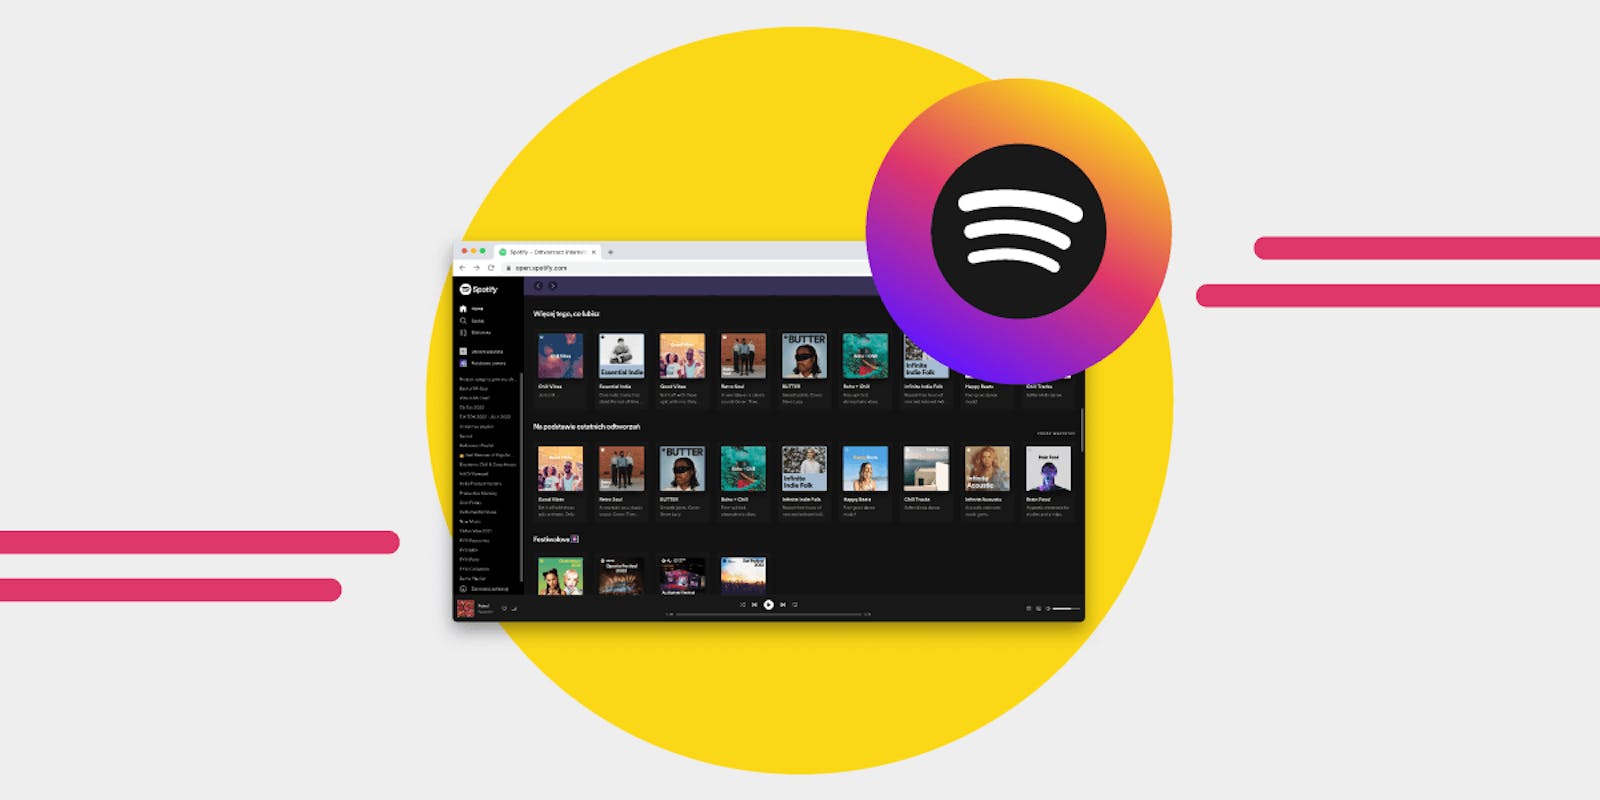 Album cover showing only in WIFI not Mobile Data - The Spotify